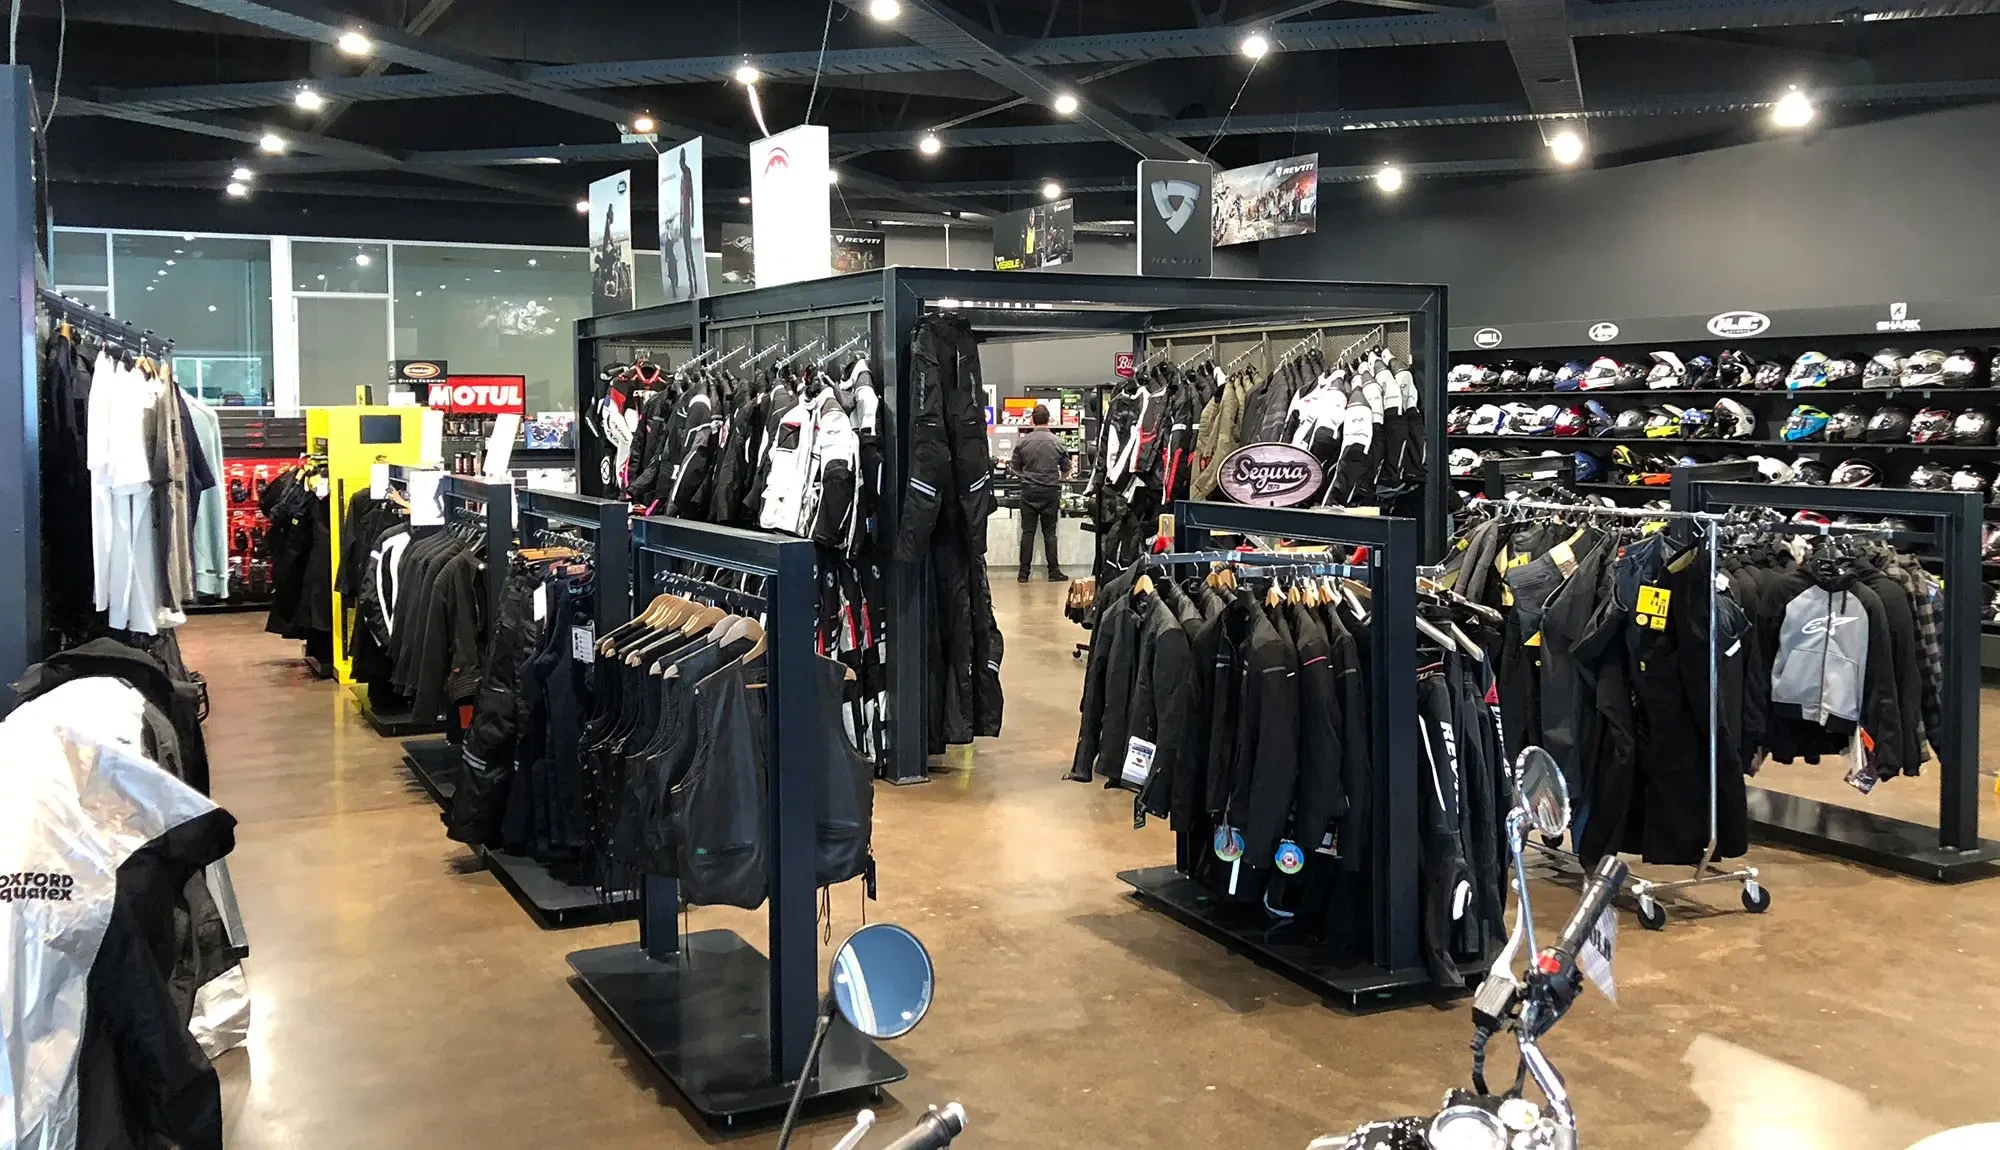 Biker Clothing - Biker style clothing & accessories